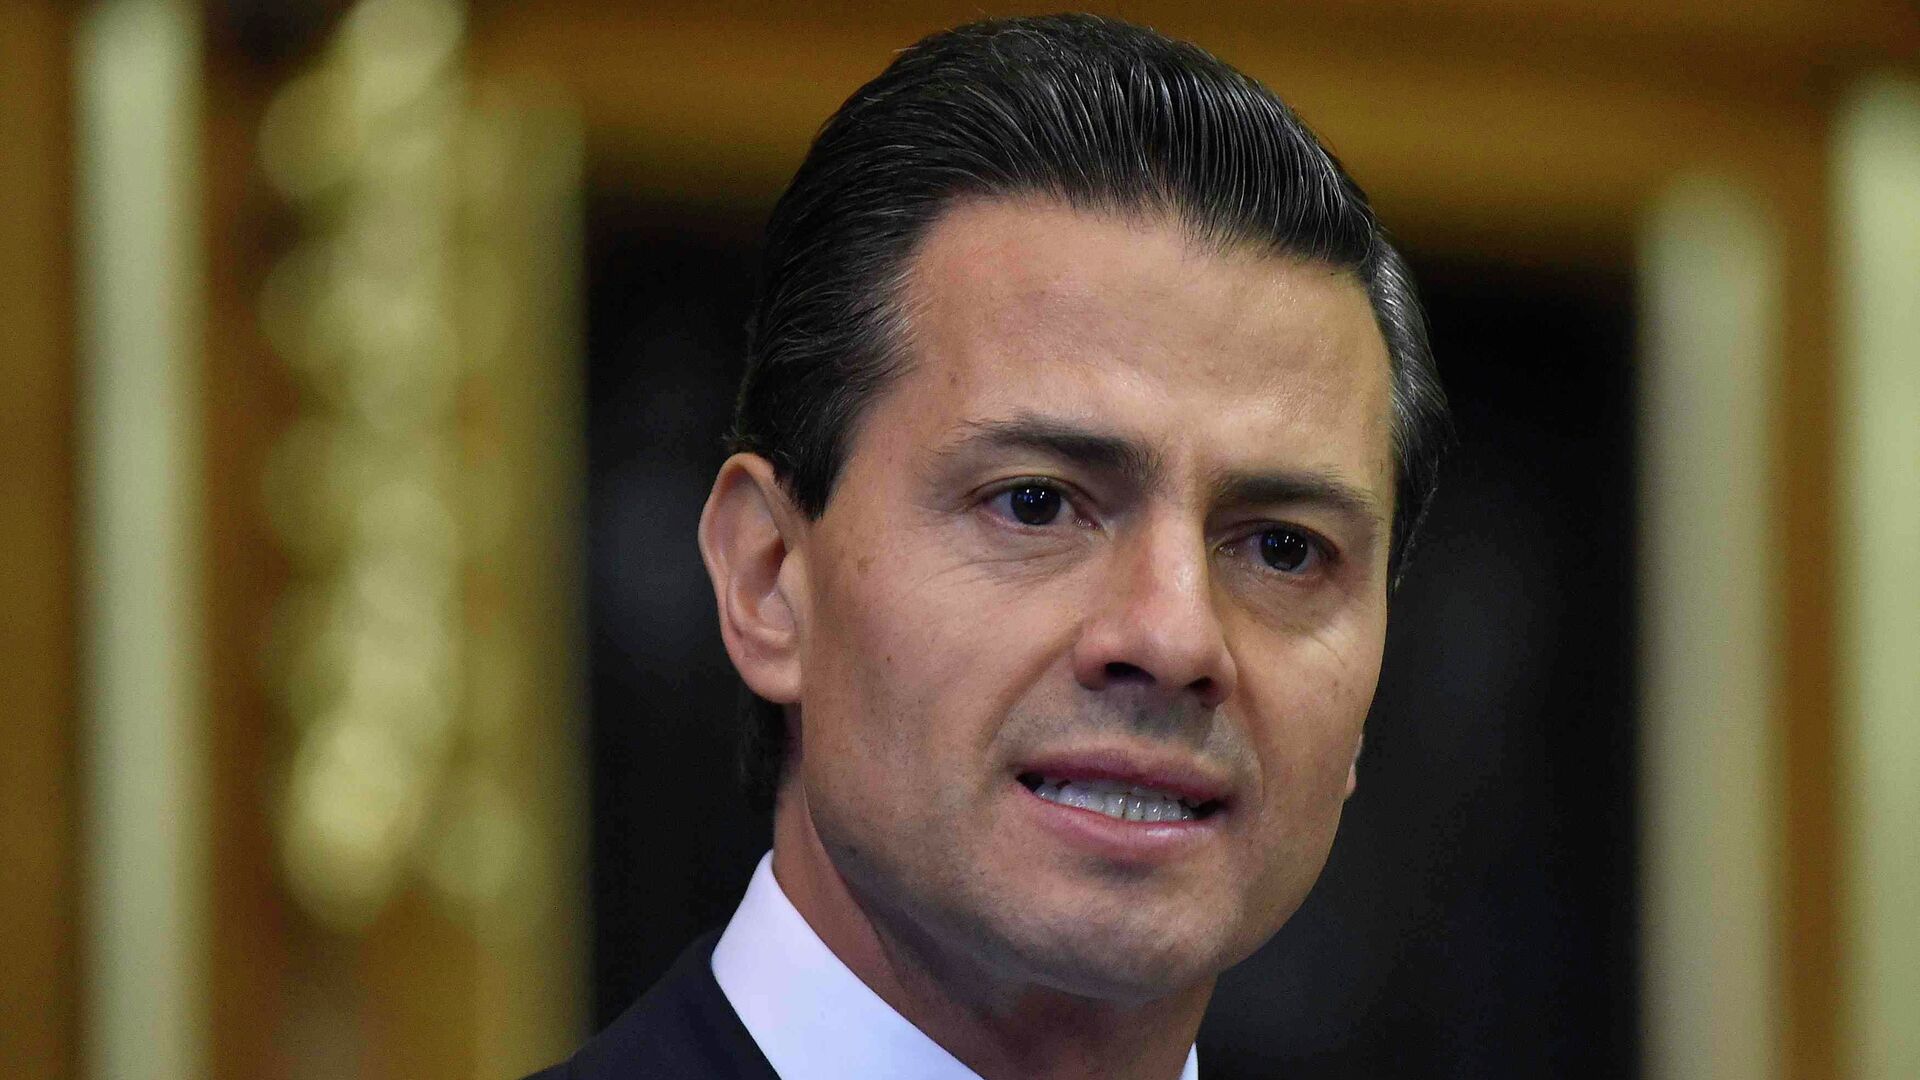 Mexico's President Enrique Pena Nieto delivers an address to members of the British All-Party Parliamentary Group at the Houses of Parliament in London, Tuesday, March 3, 2015 - Sputnik Mundo, 1920, 25.08.2021